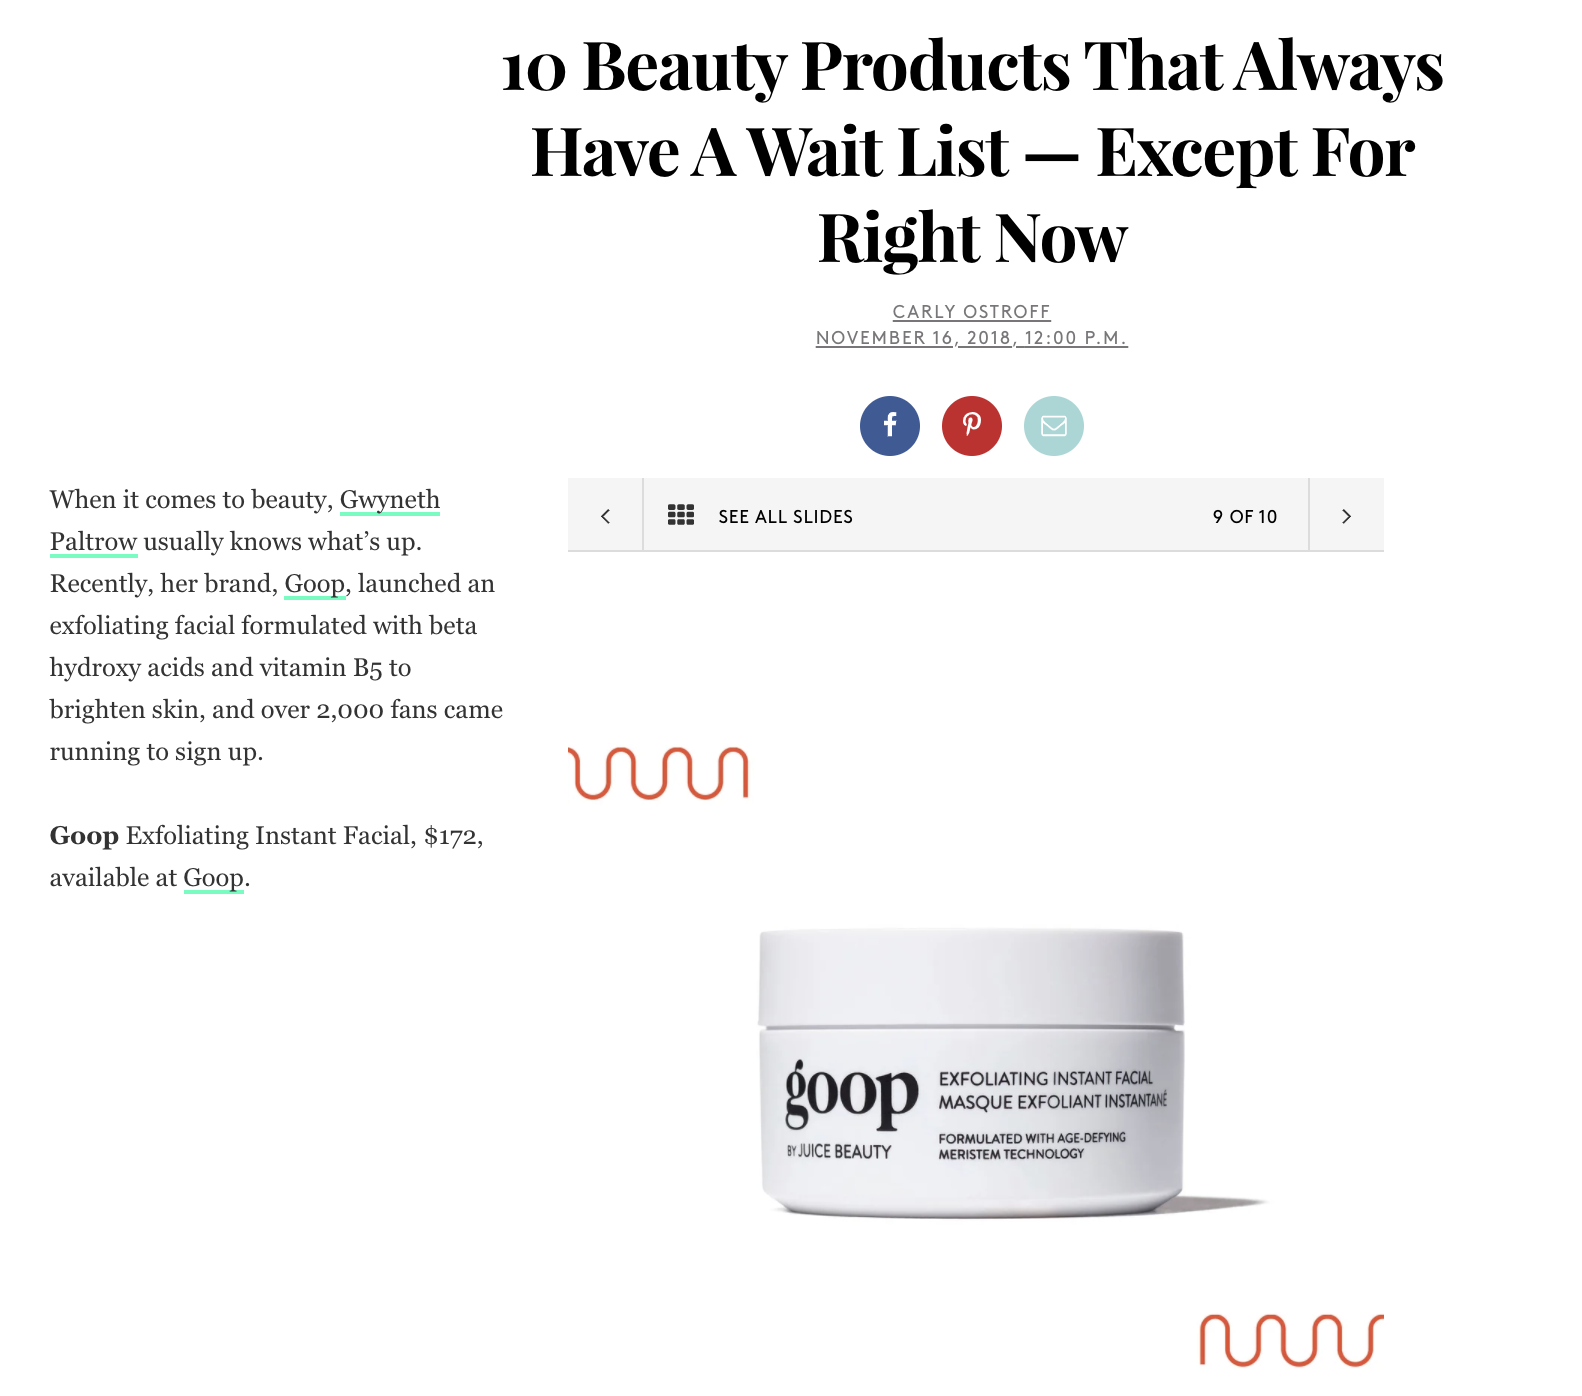 Beauty Brands Are Rediscovering an Old-School Way to Sell Their Products